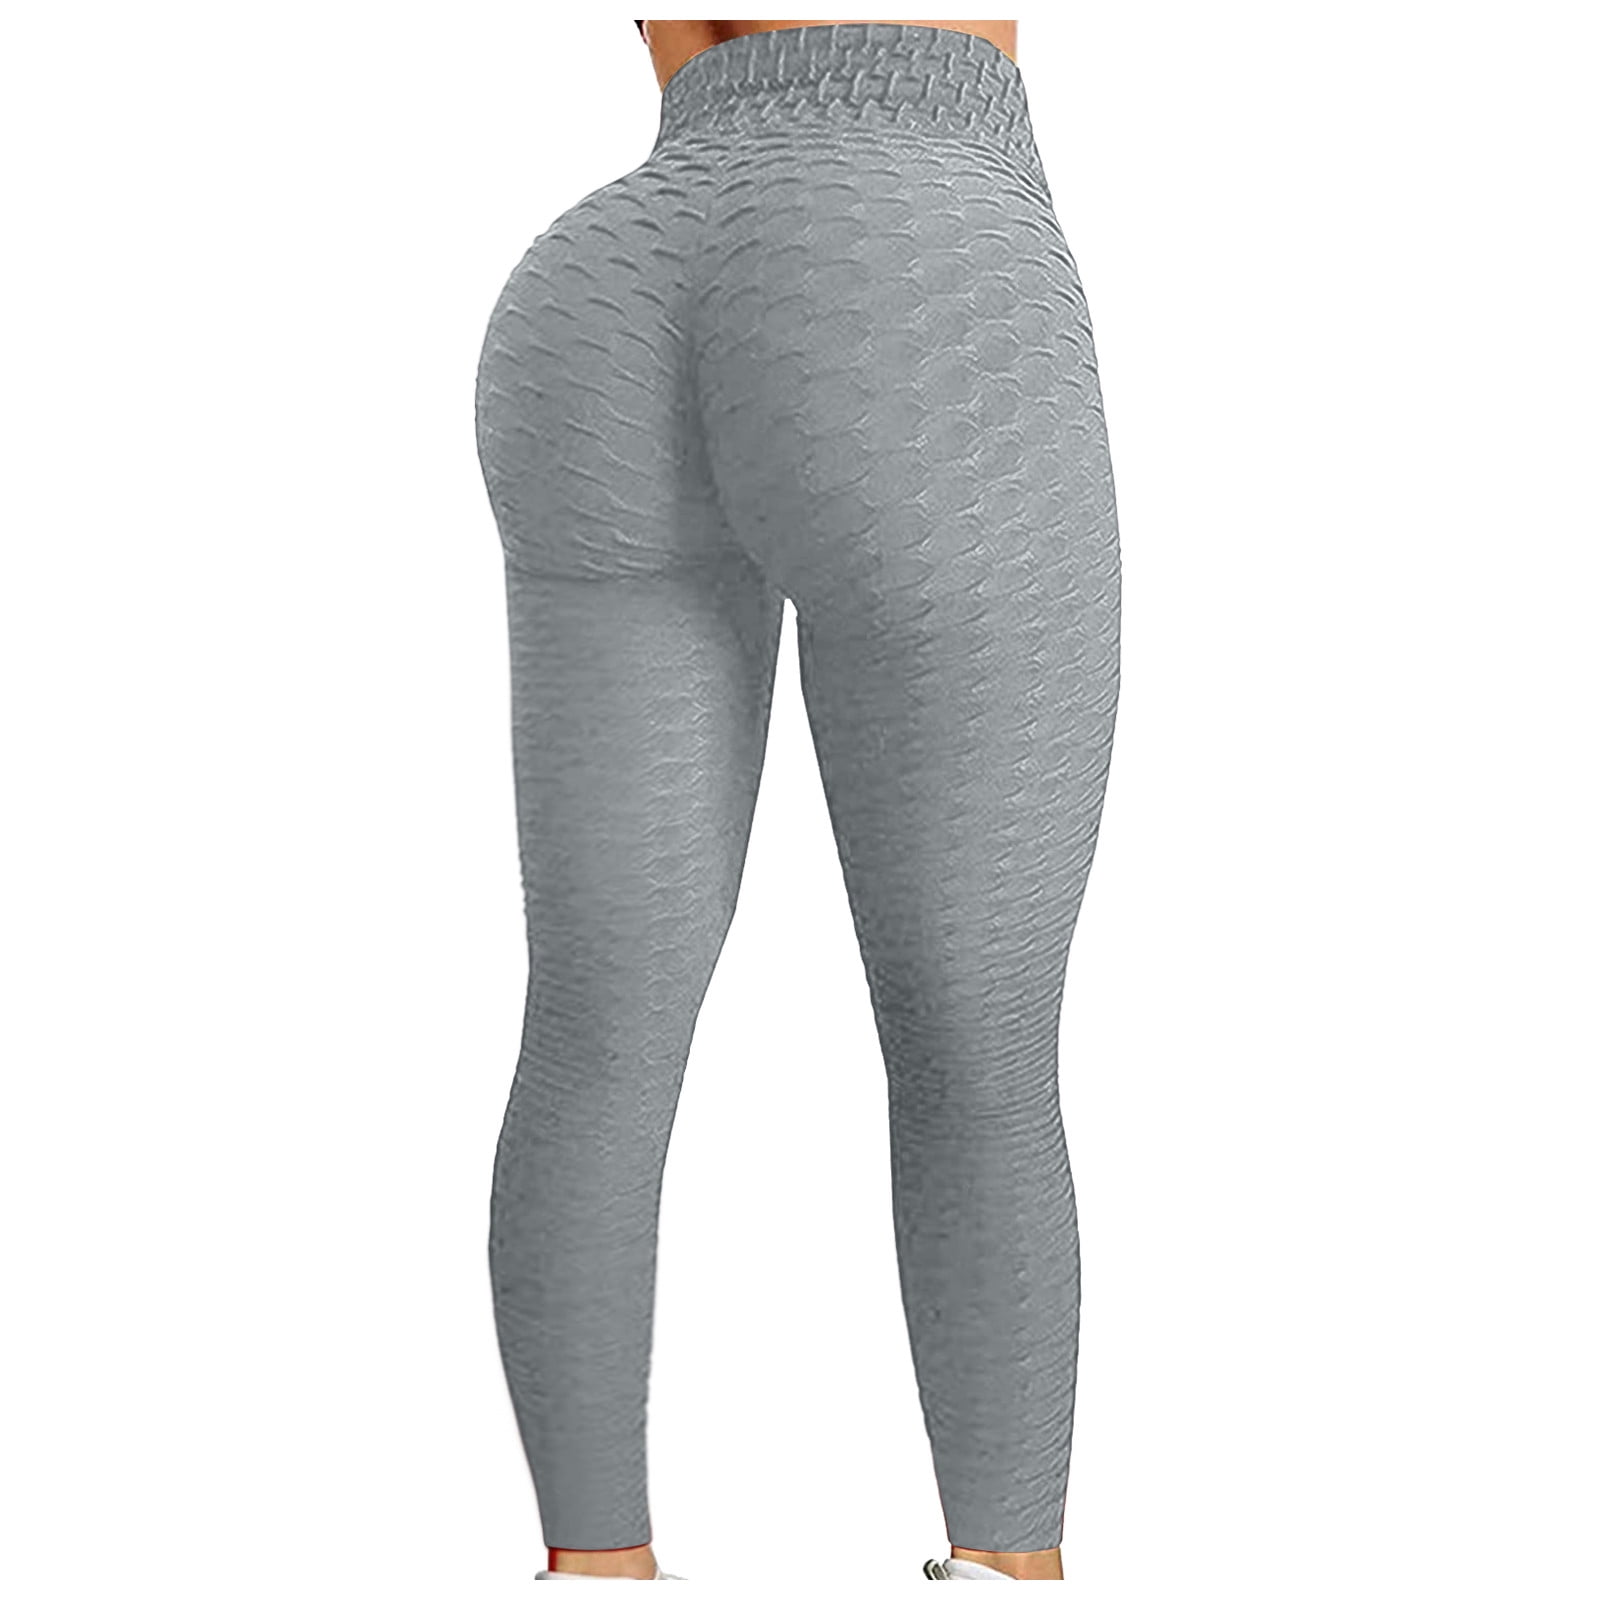 02332 Women Double-sided Brushed Yoga Pants Hip Lifting High Waist Tights  Stretch Fitness Leggings with Hidden Pocket - Grey/XL Wholesale